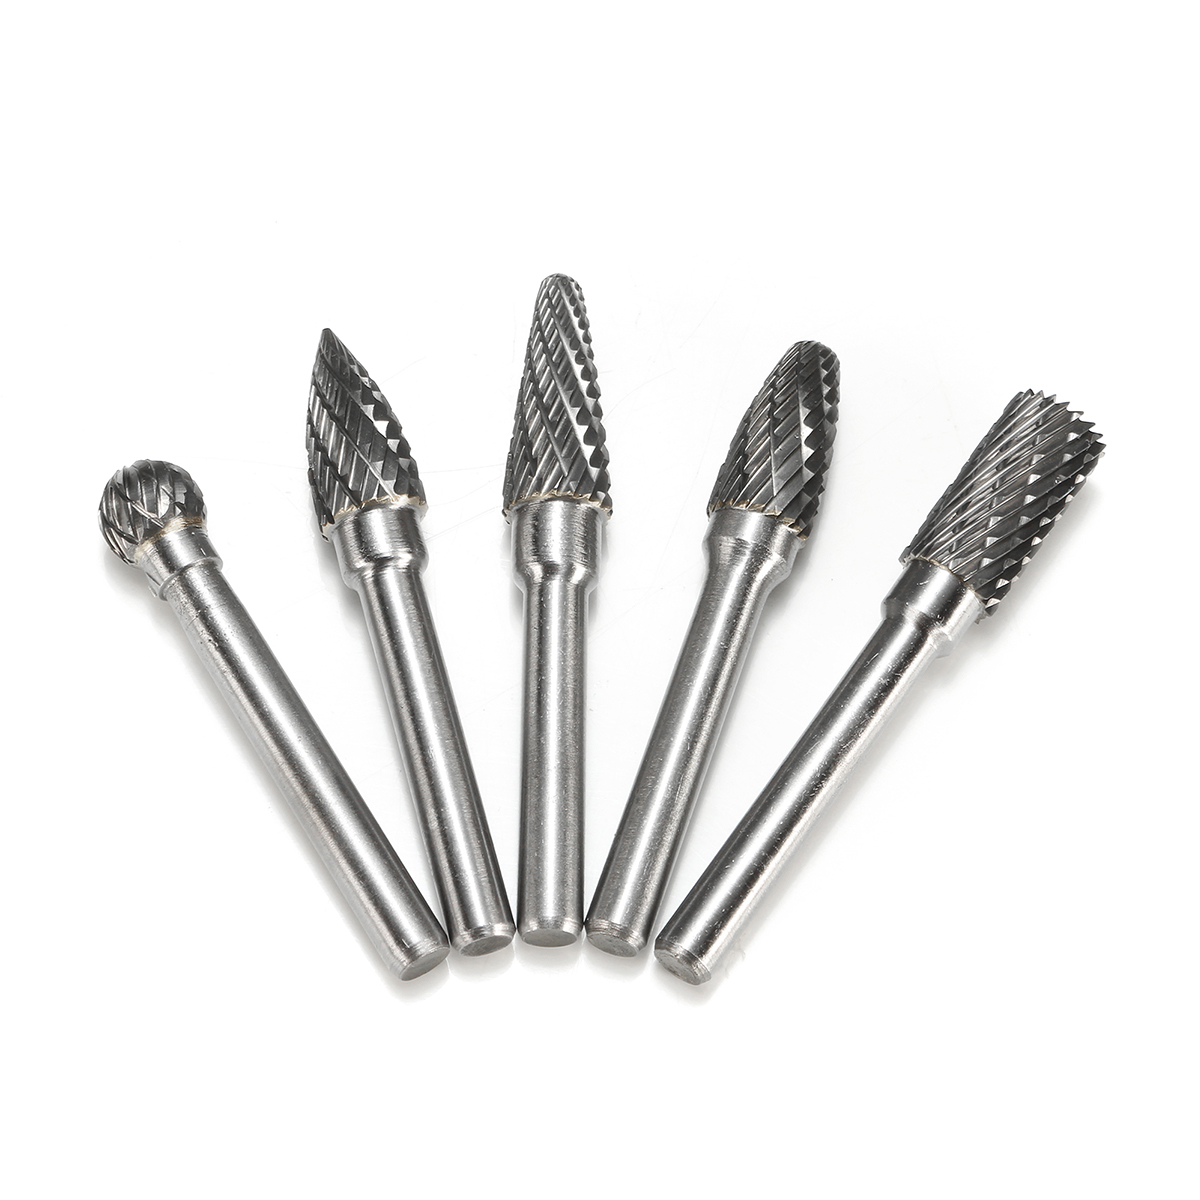 Drillpro-RB29-5pcs-6mm-Shank-Tungsten-Carbide-Burr-Rotary-Cutter-file-Set-Engraving-Tool-1029284-2